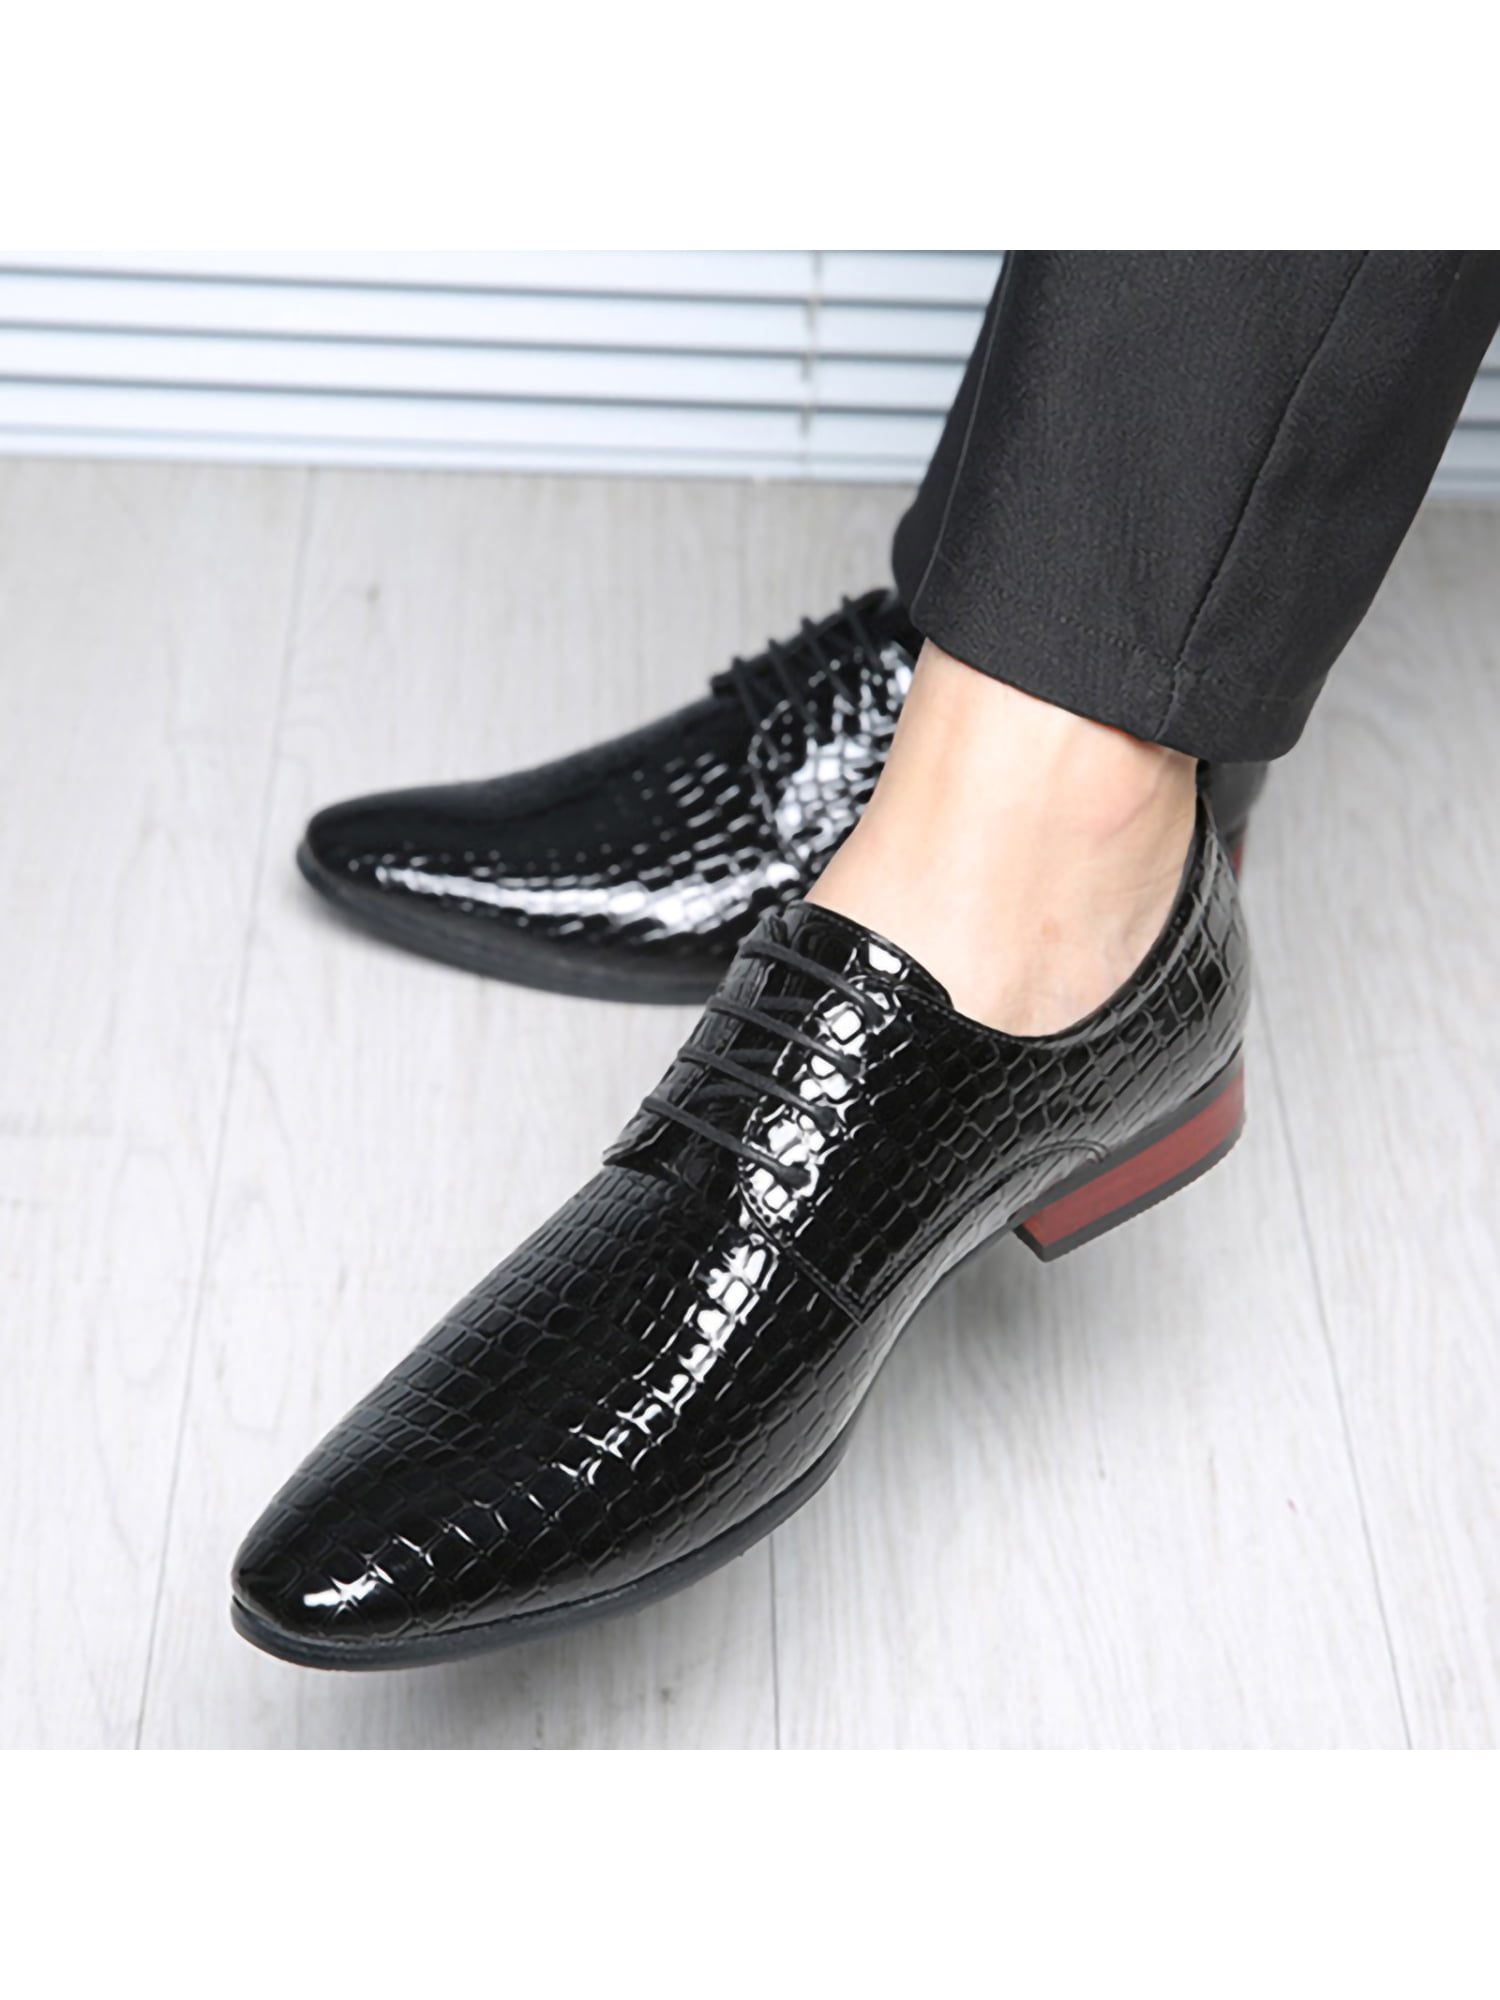 Simanlan Mens Leather Shoe Business Oxfords Formal Dress Shoes Wedding Lightweight Flats Party Lace Up Slip-On Height Increase 8, Men's, Size: One